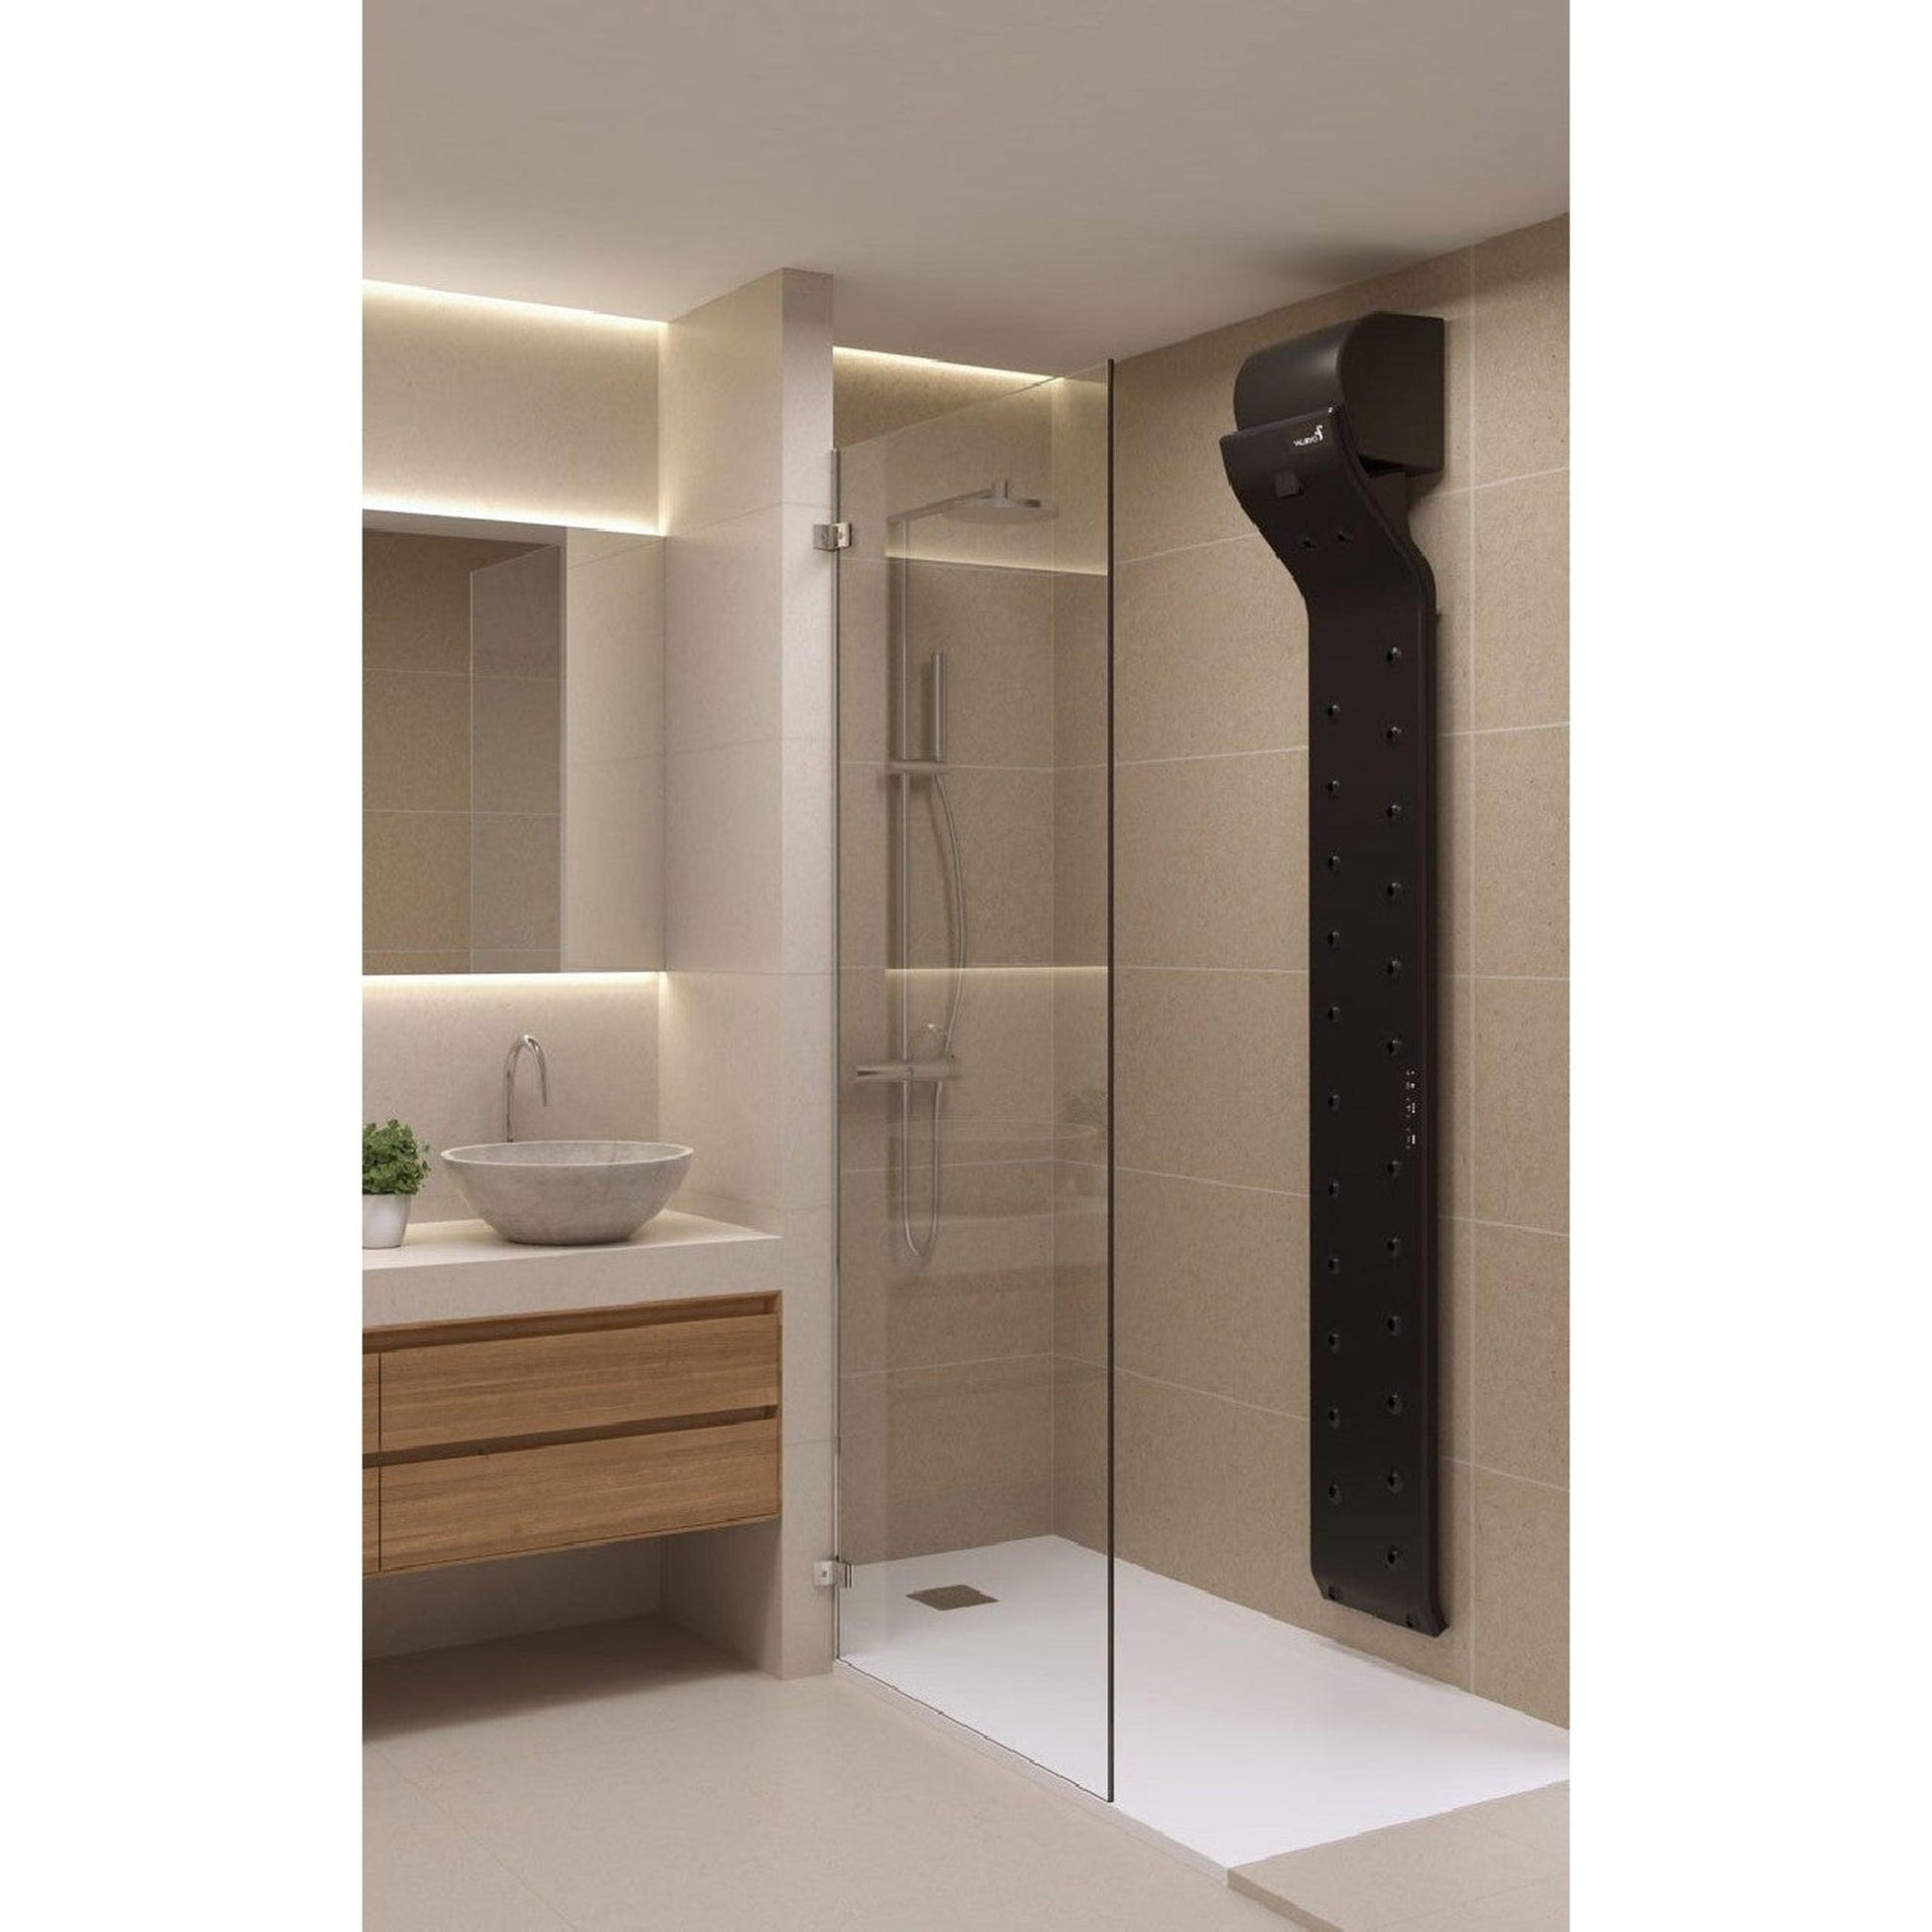 Bath Bathroom Air For In Shower Full-Body-Dryer Hotel Automatic Toilet And  Hair Machine Body Dryer